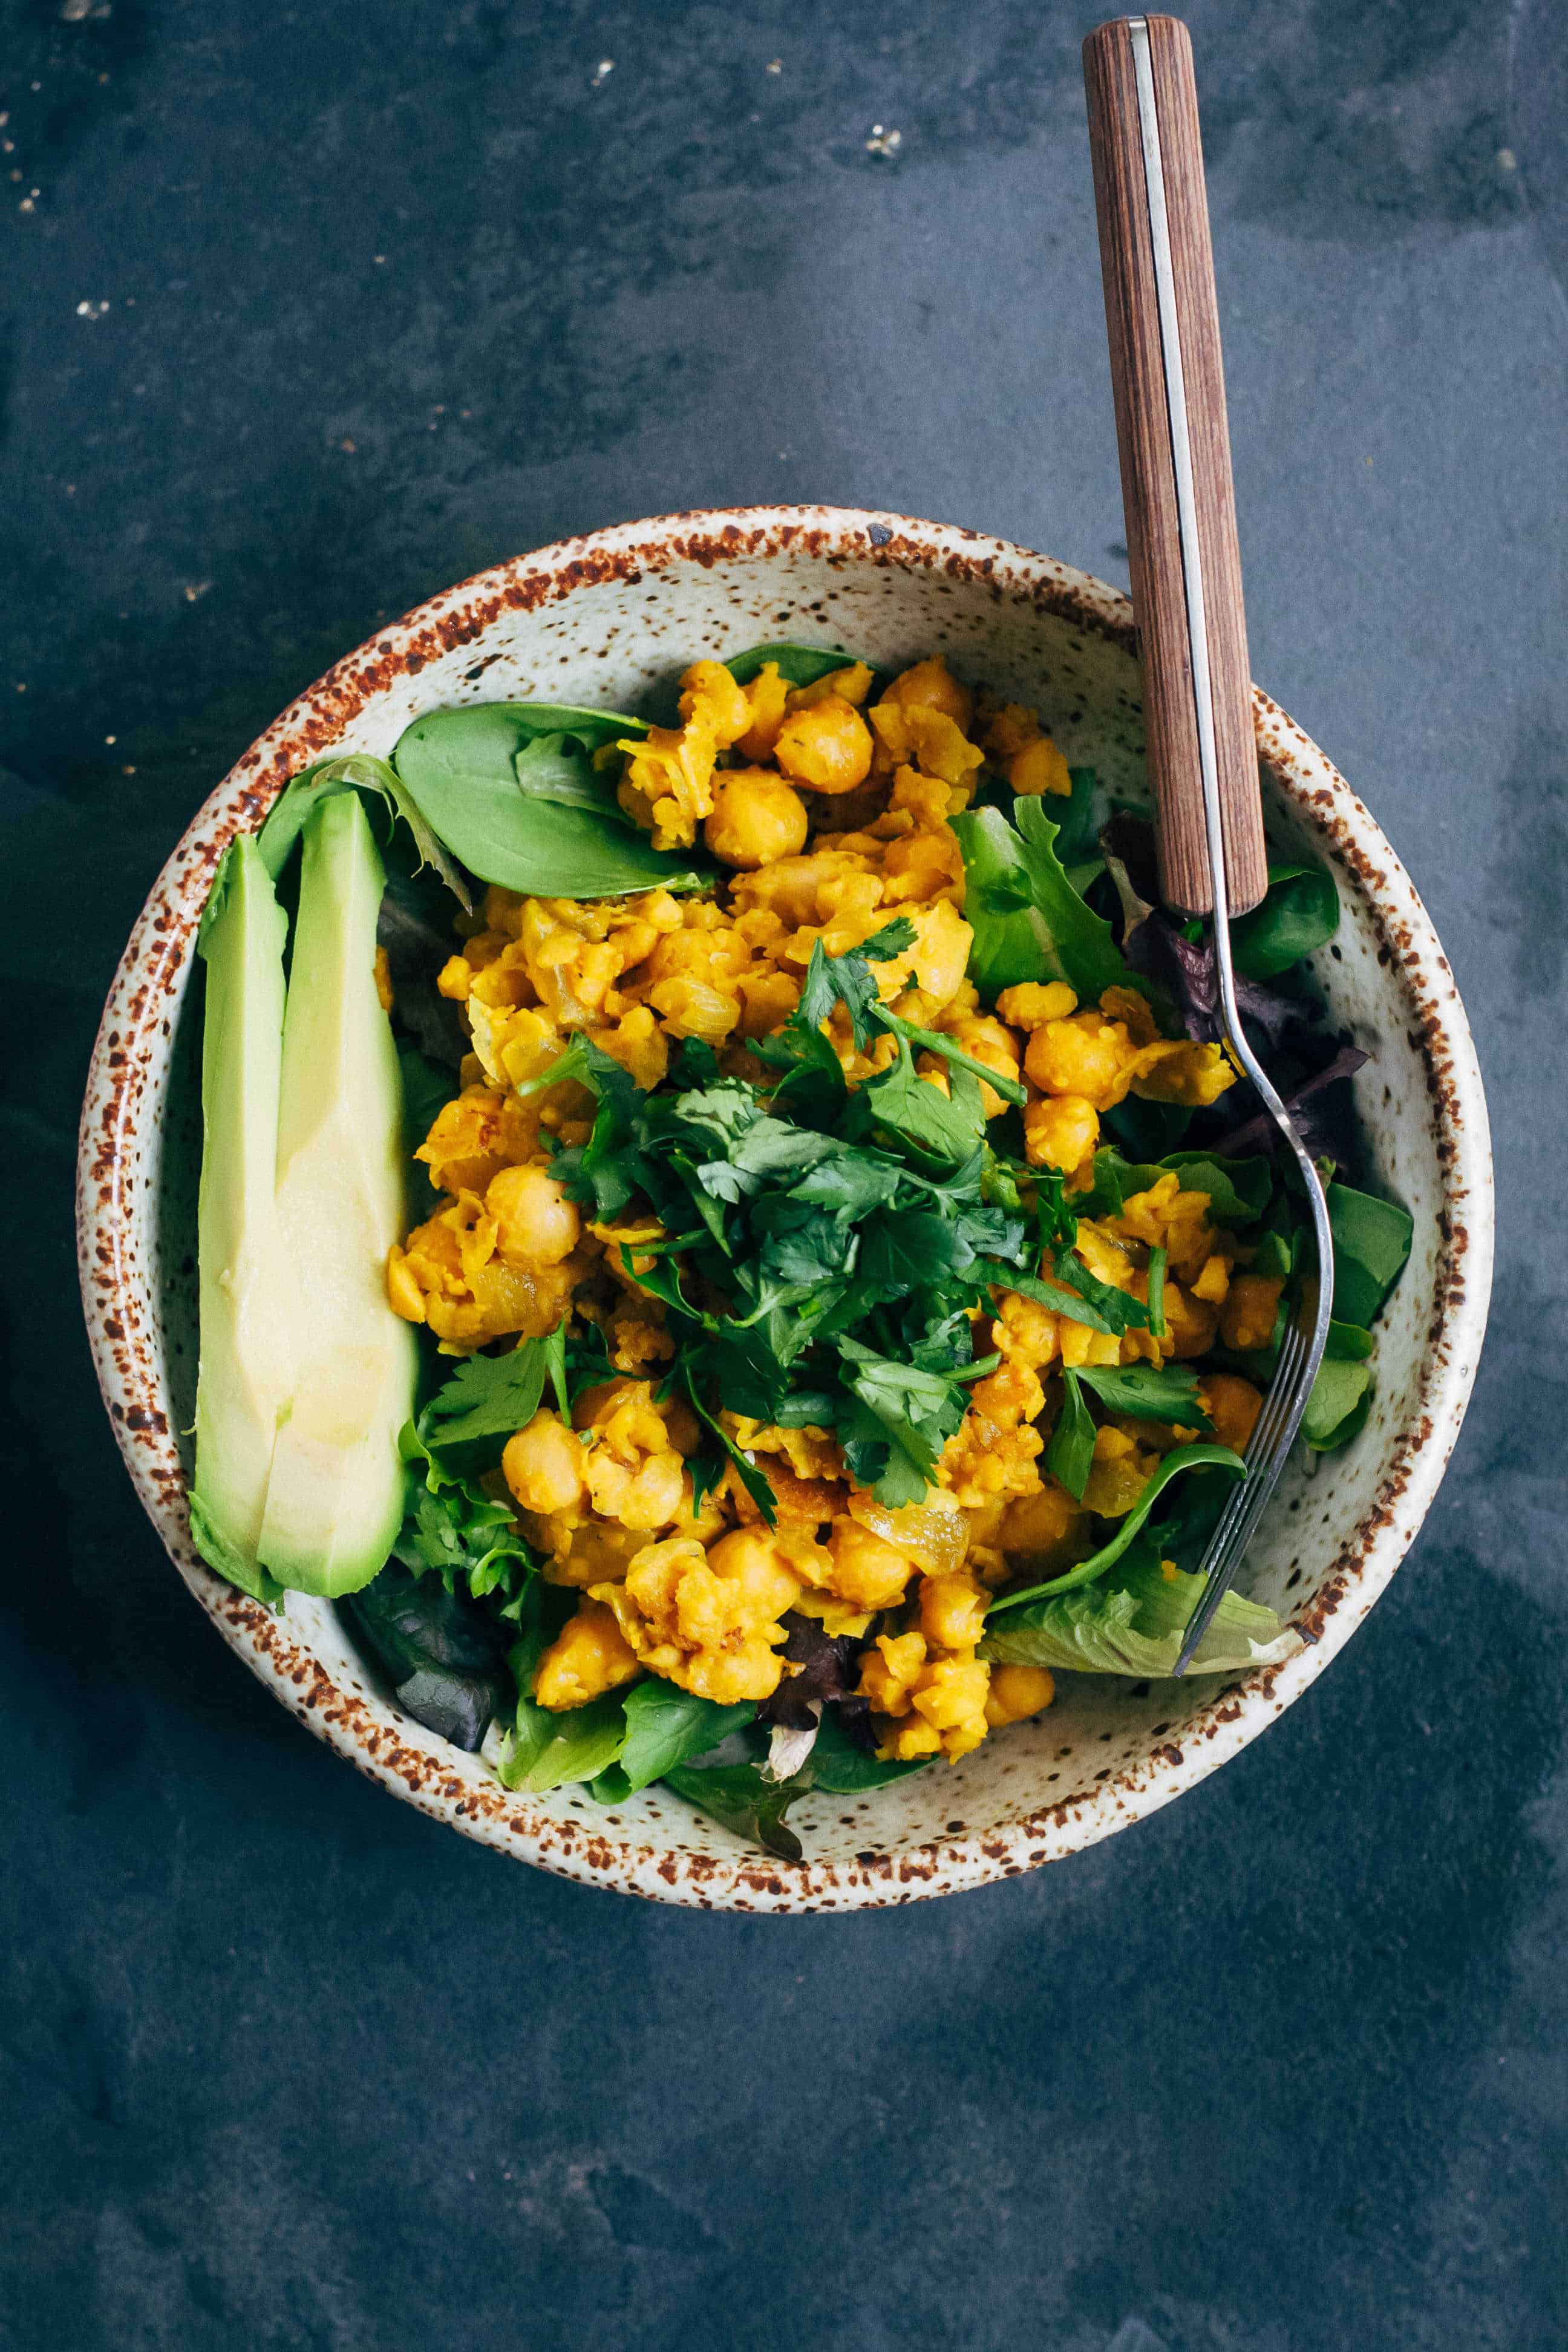 25 high proteins breakfast ideas for fast weight loss. Chickpeas scramble breakfast bowl. Best protein source foods to eat. Rich protein breakfast recipes. Best weight loss meals plan. 